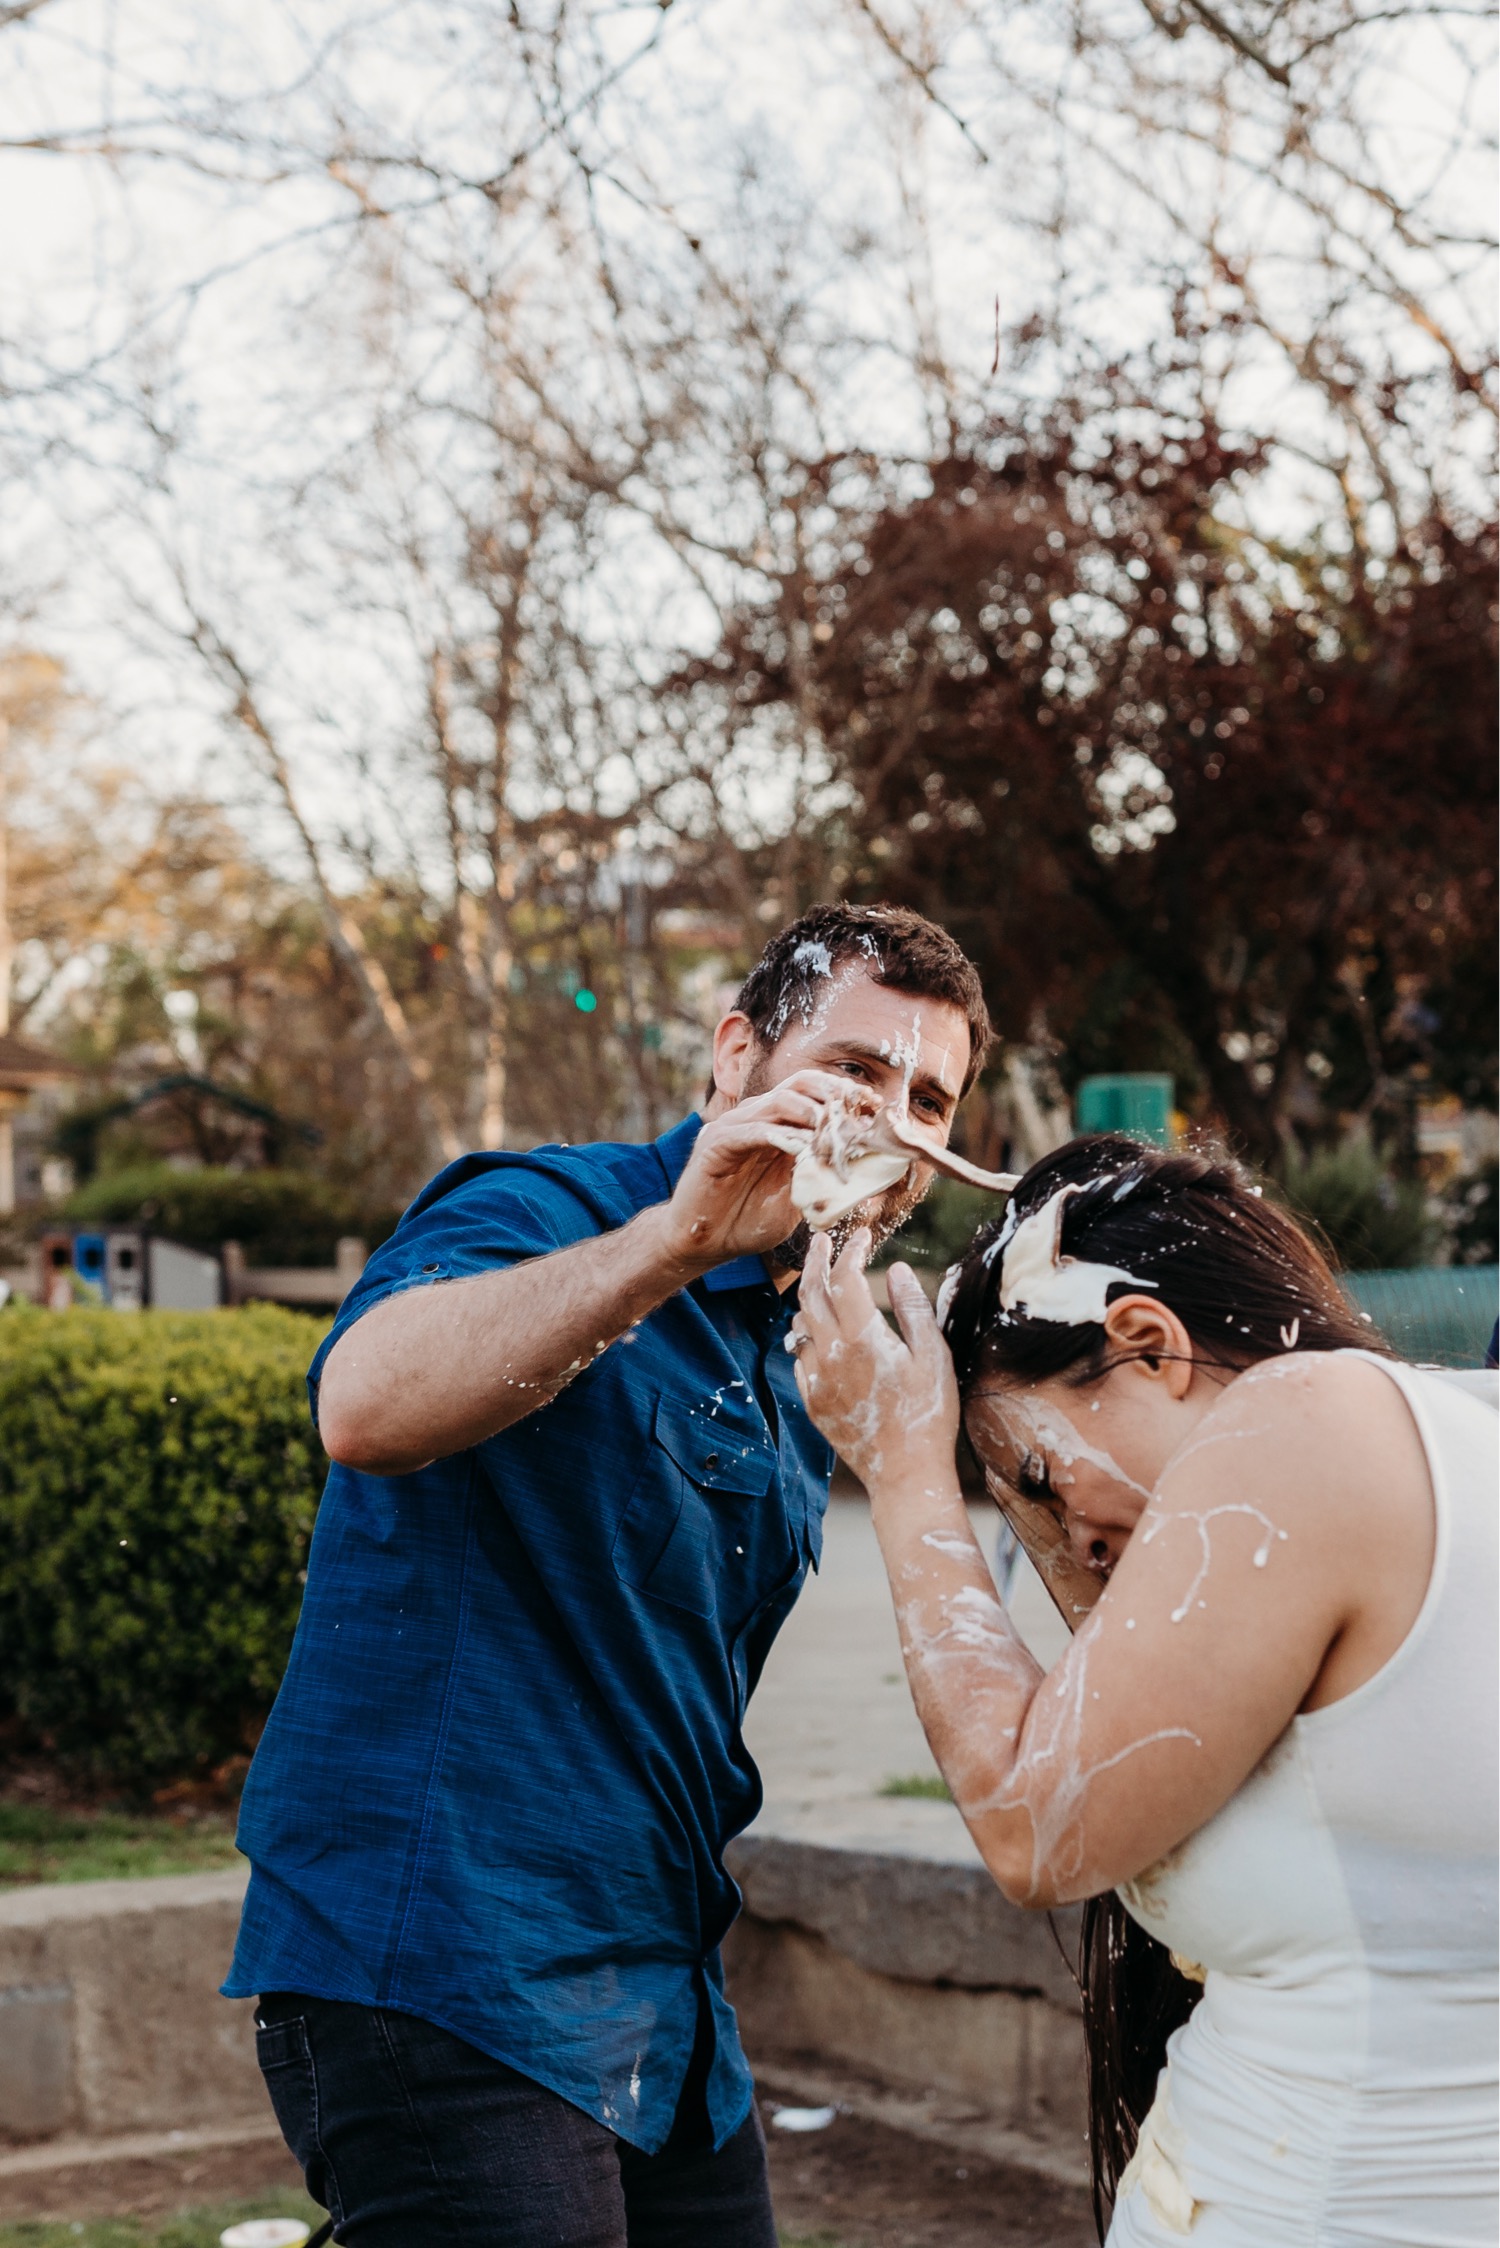 Man throws ice cream on his fiance's head during an ice cream food fight during their Downtown Davis engagement photoshoot.